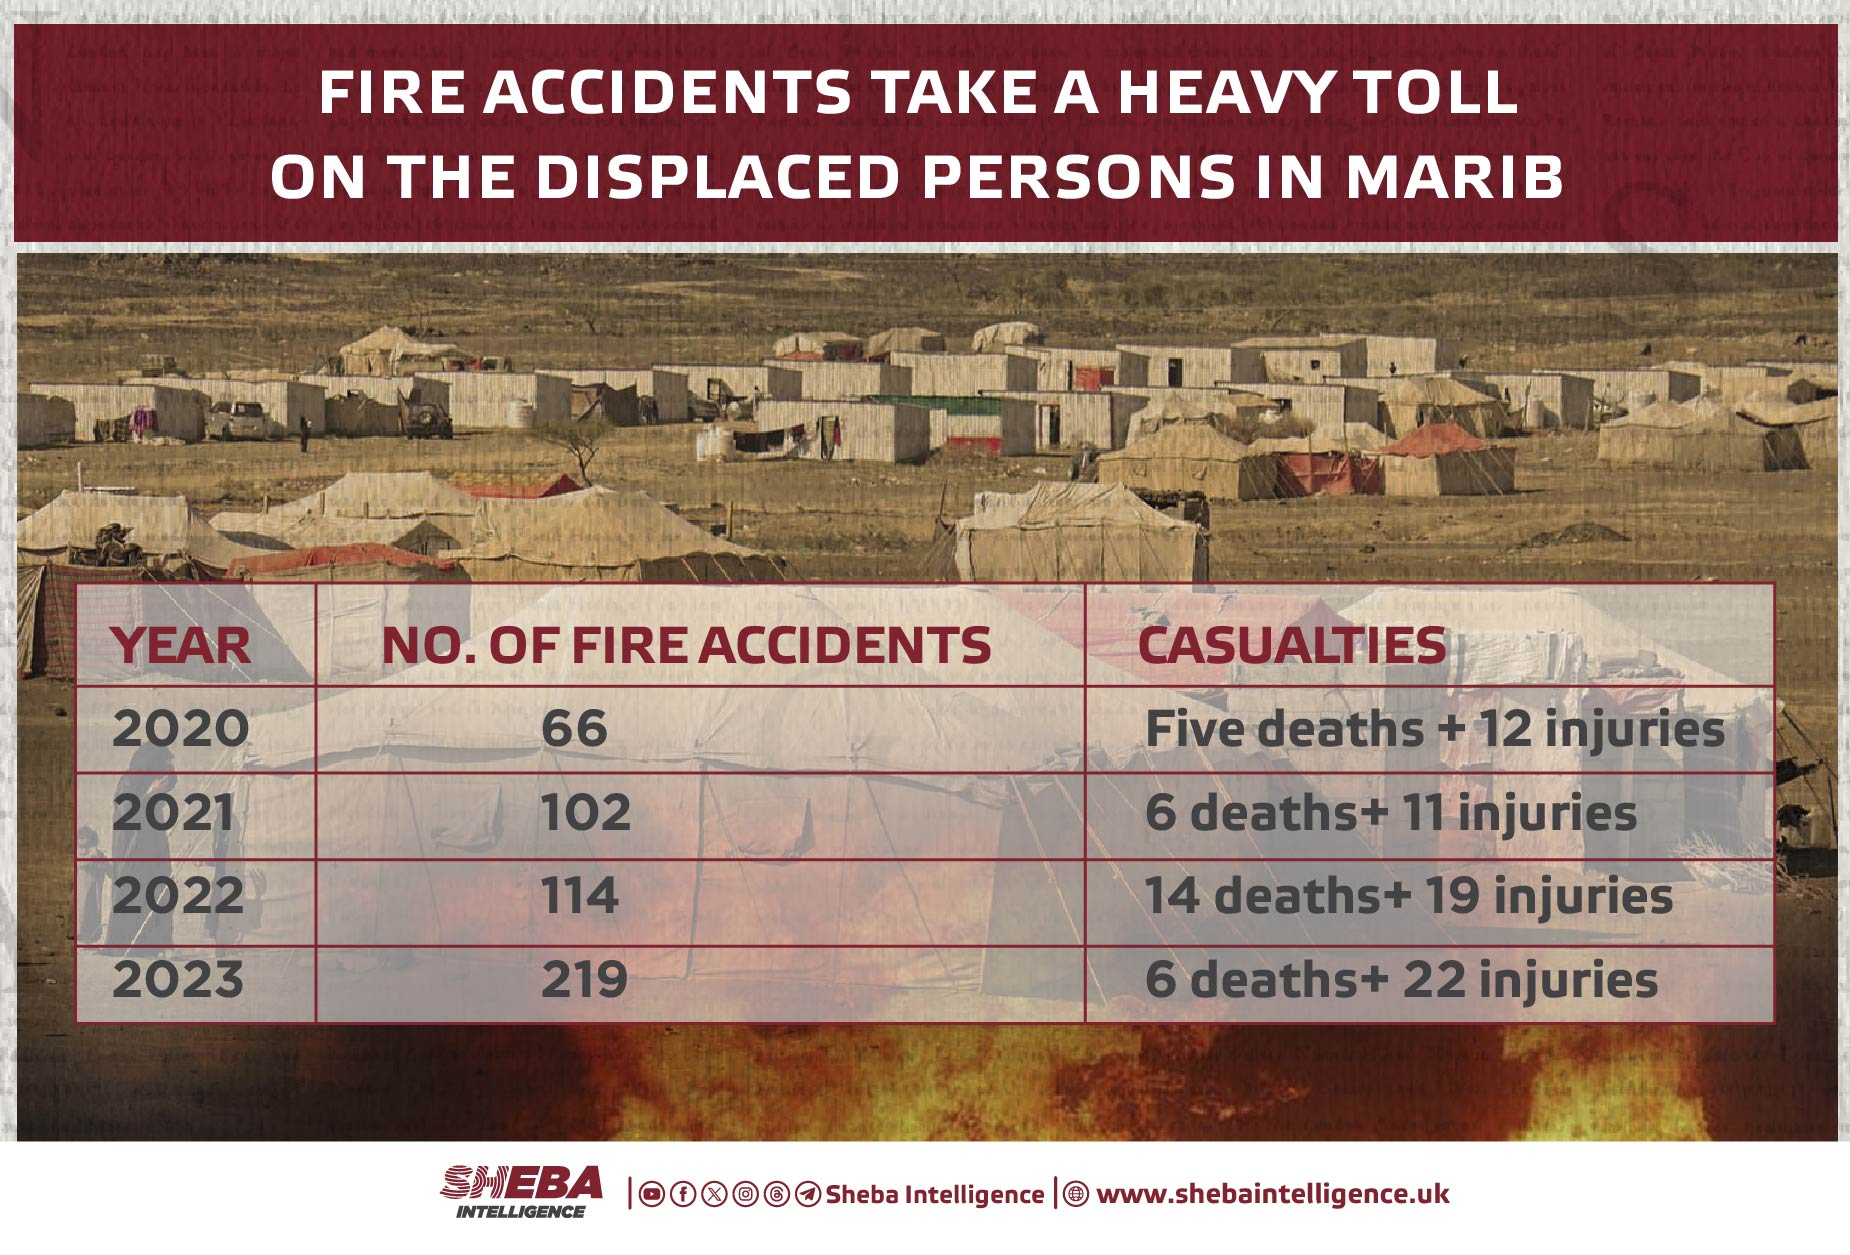 Fire Accidents Take a Heavy Toll on the Displaced Persons in Marib